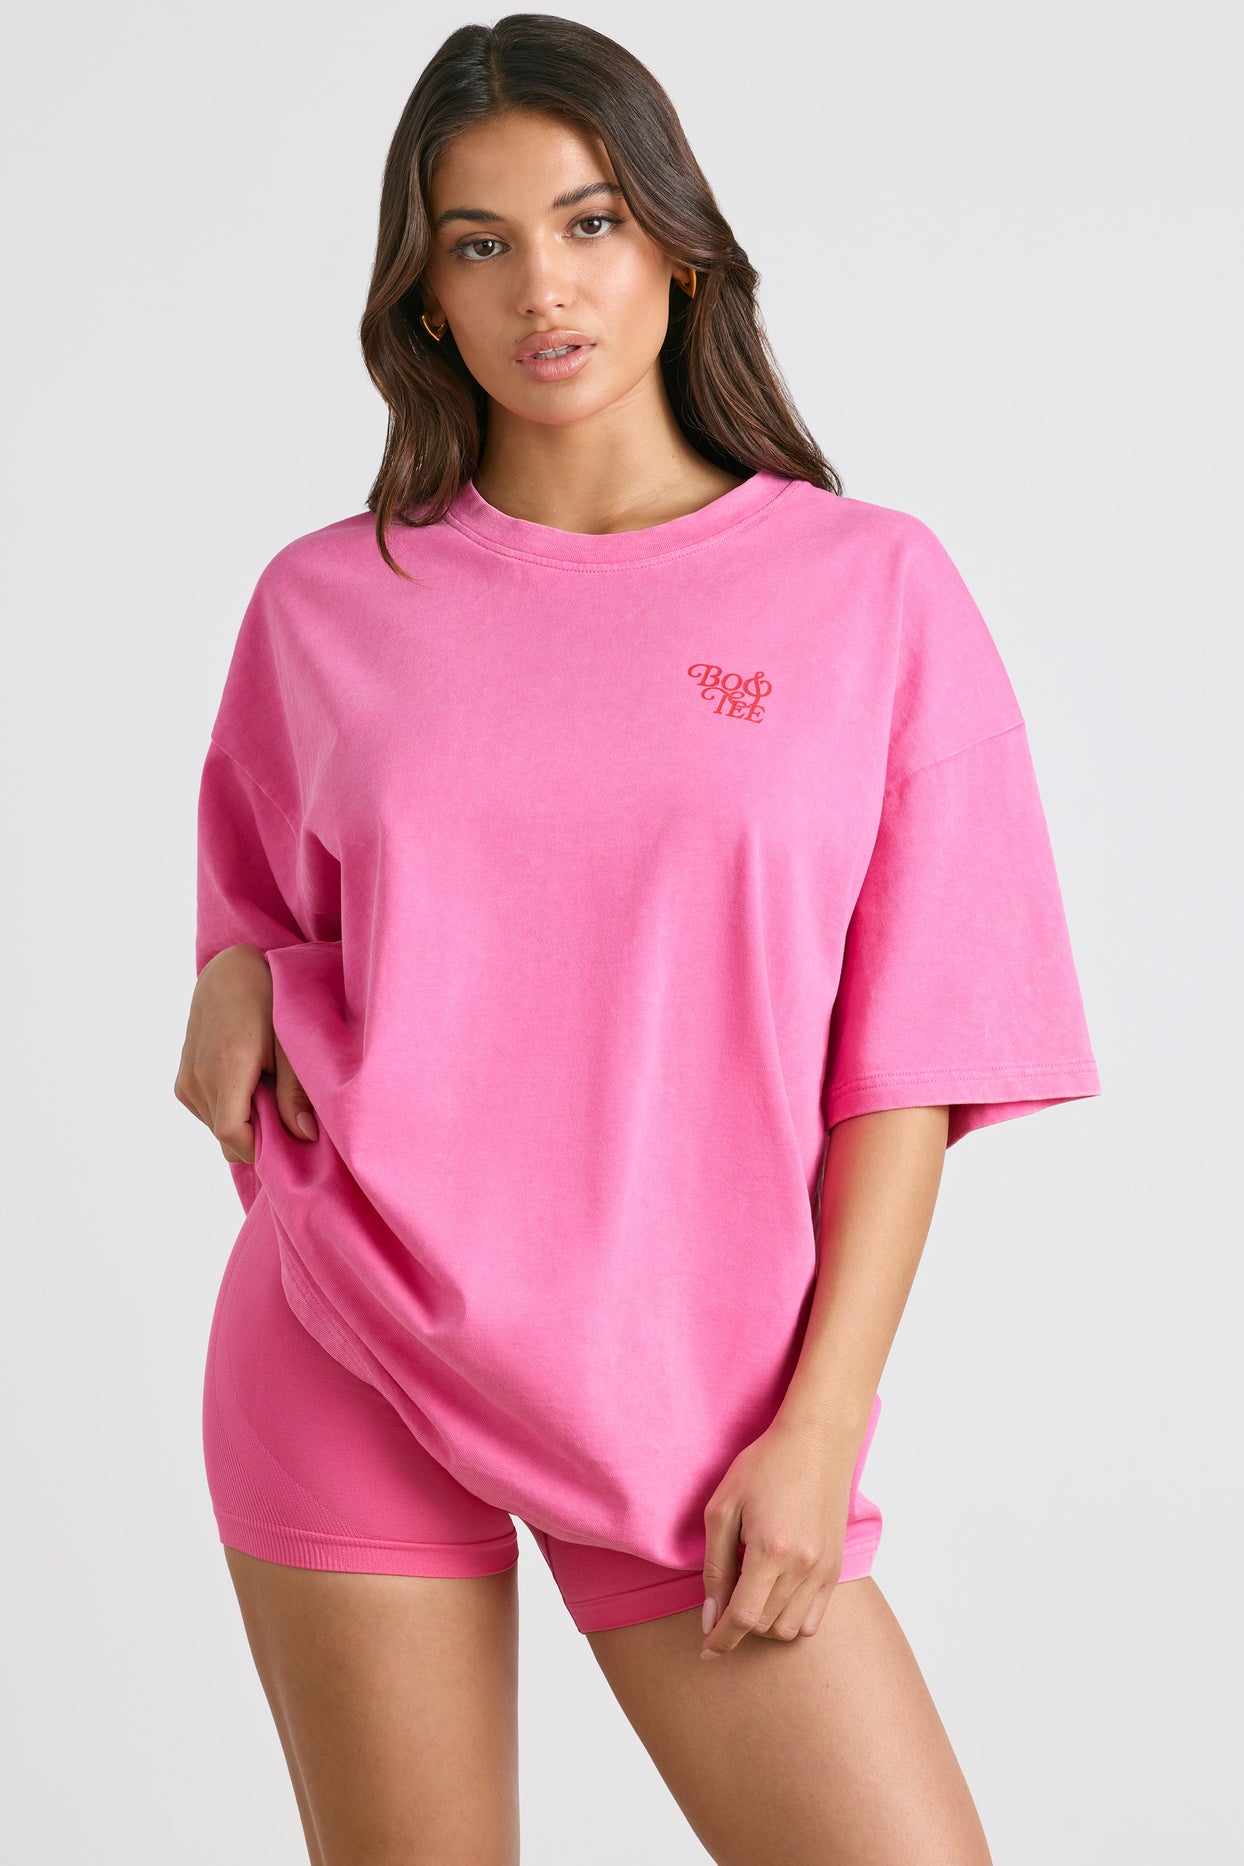 Oversized Short-Sleeve T-shirt in Hot Pink